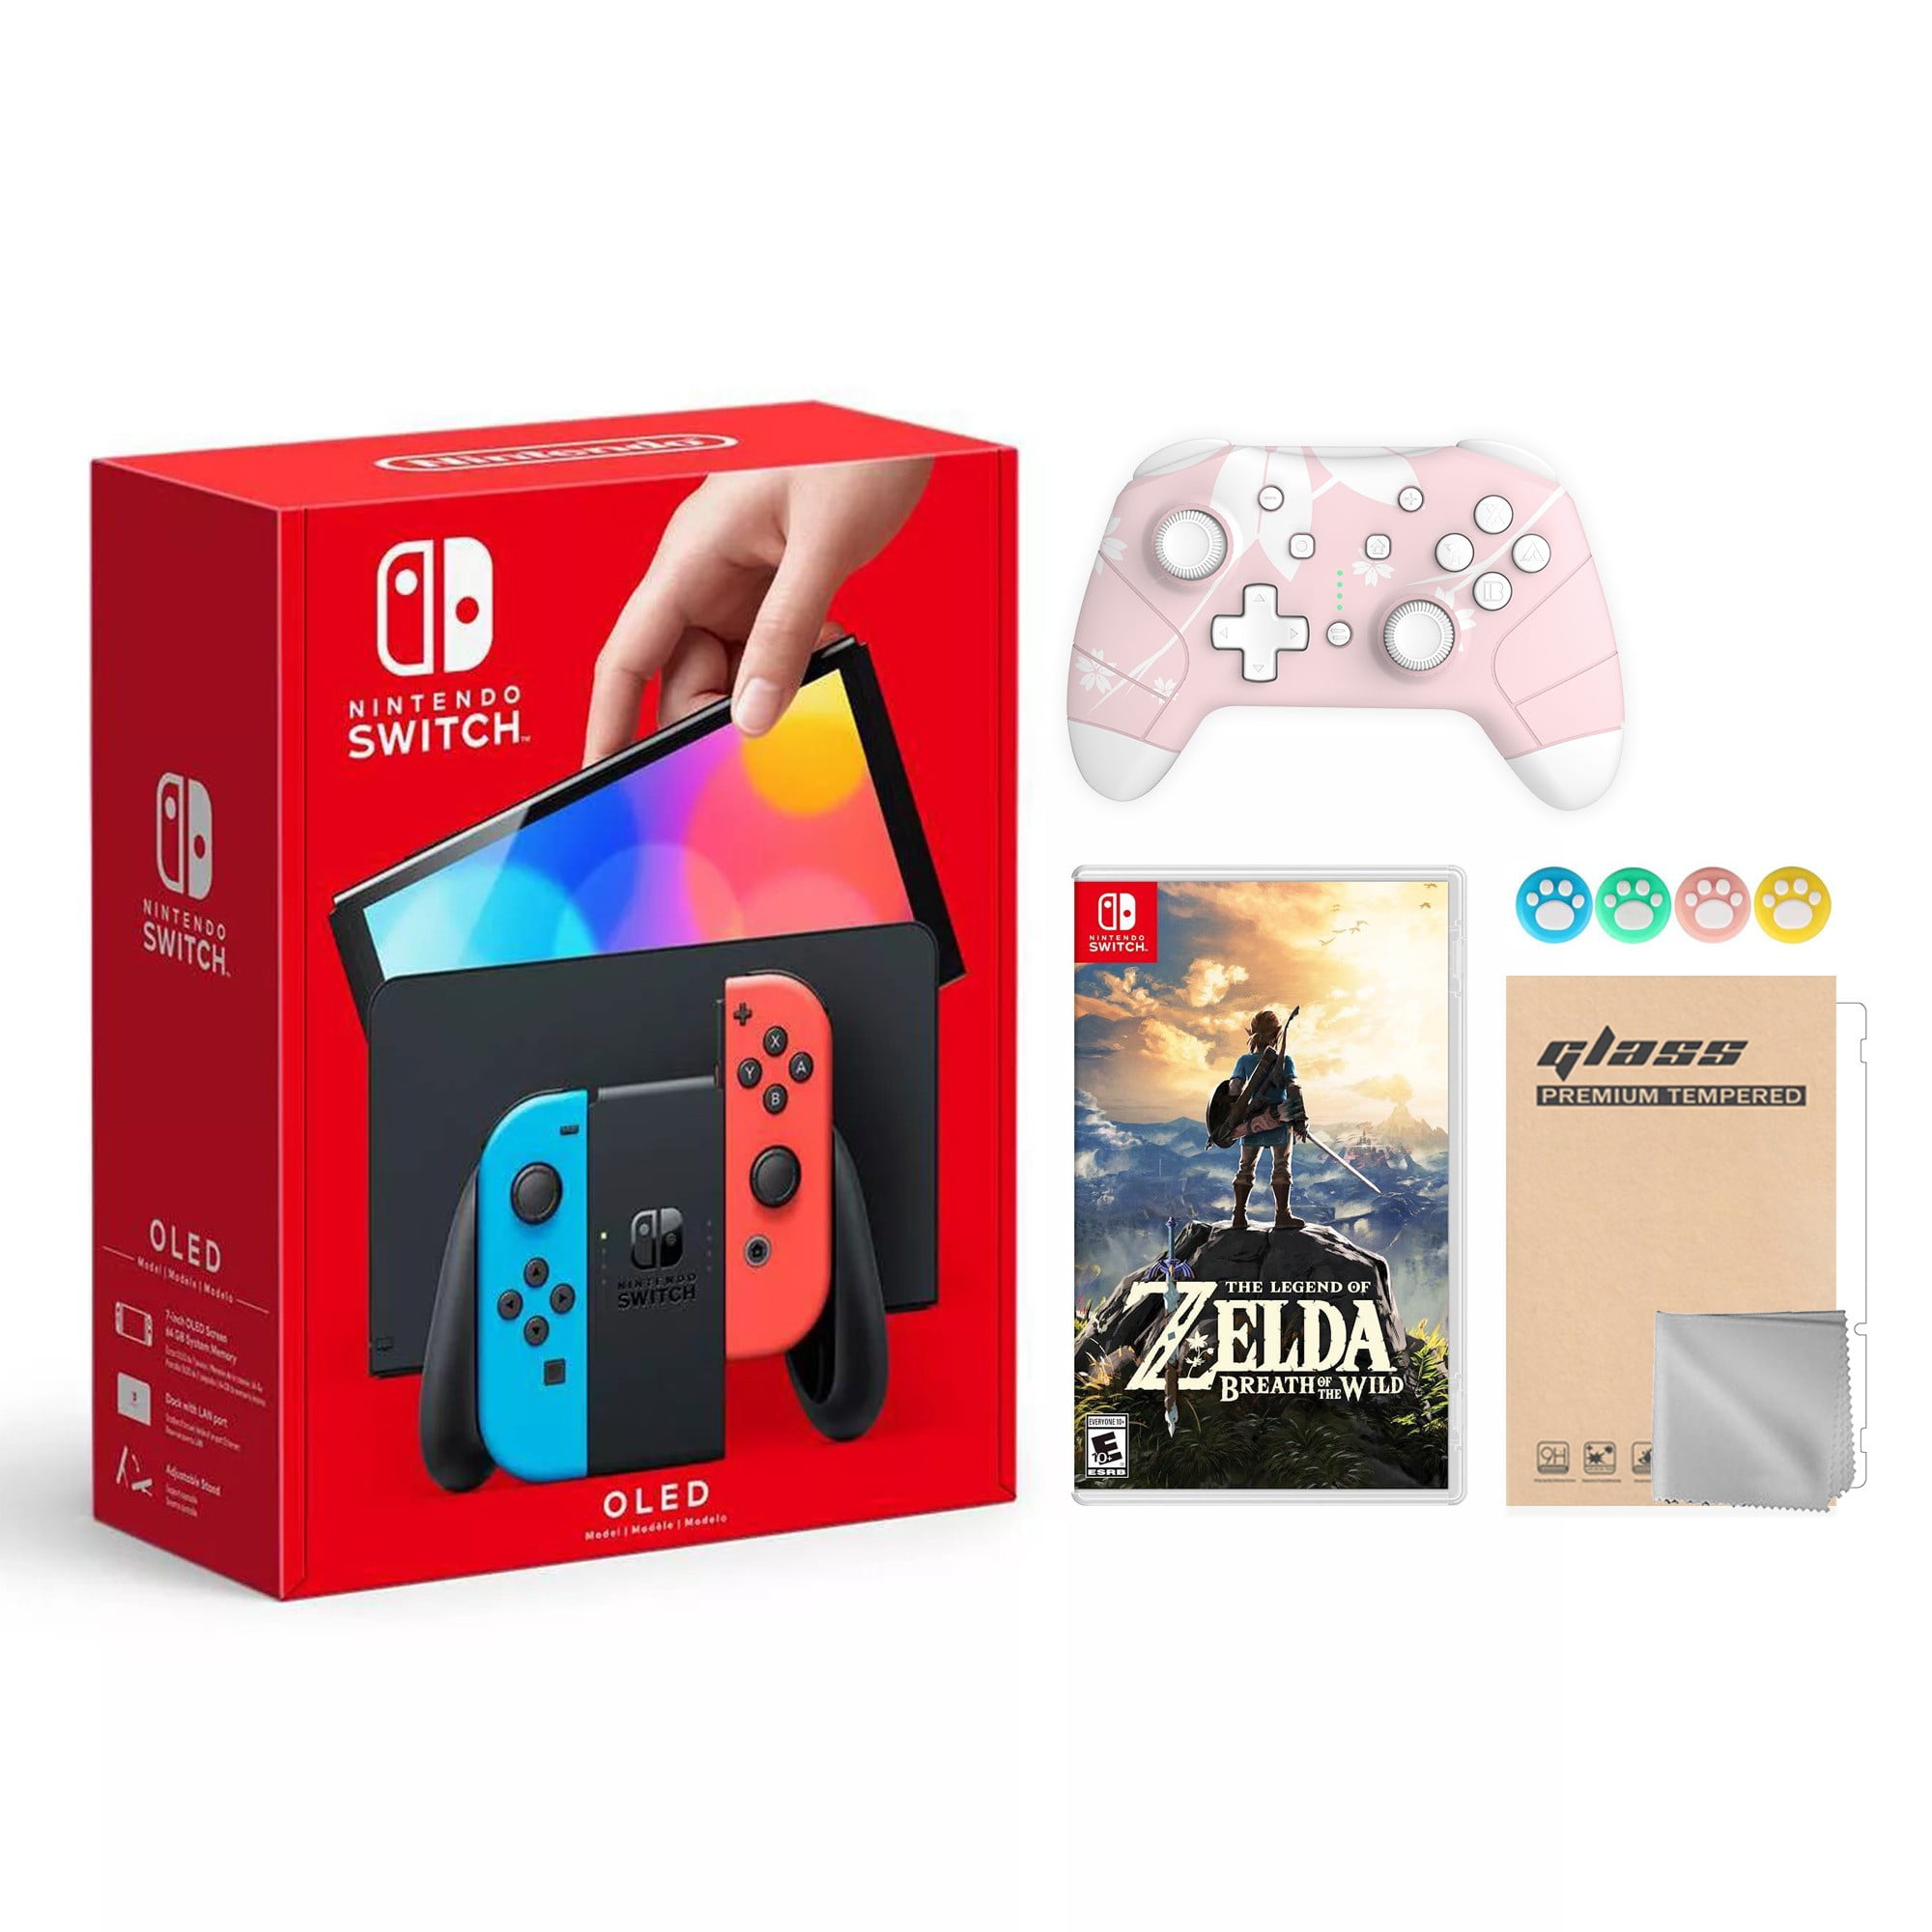 Nintendo Switch OLED Model Neon Red and Blue Joy Con 64GB 